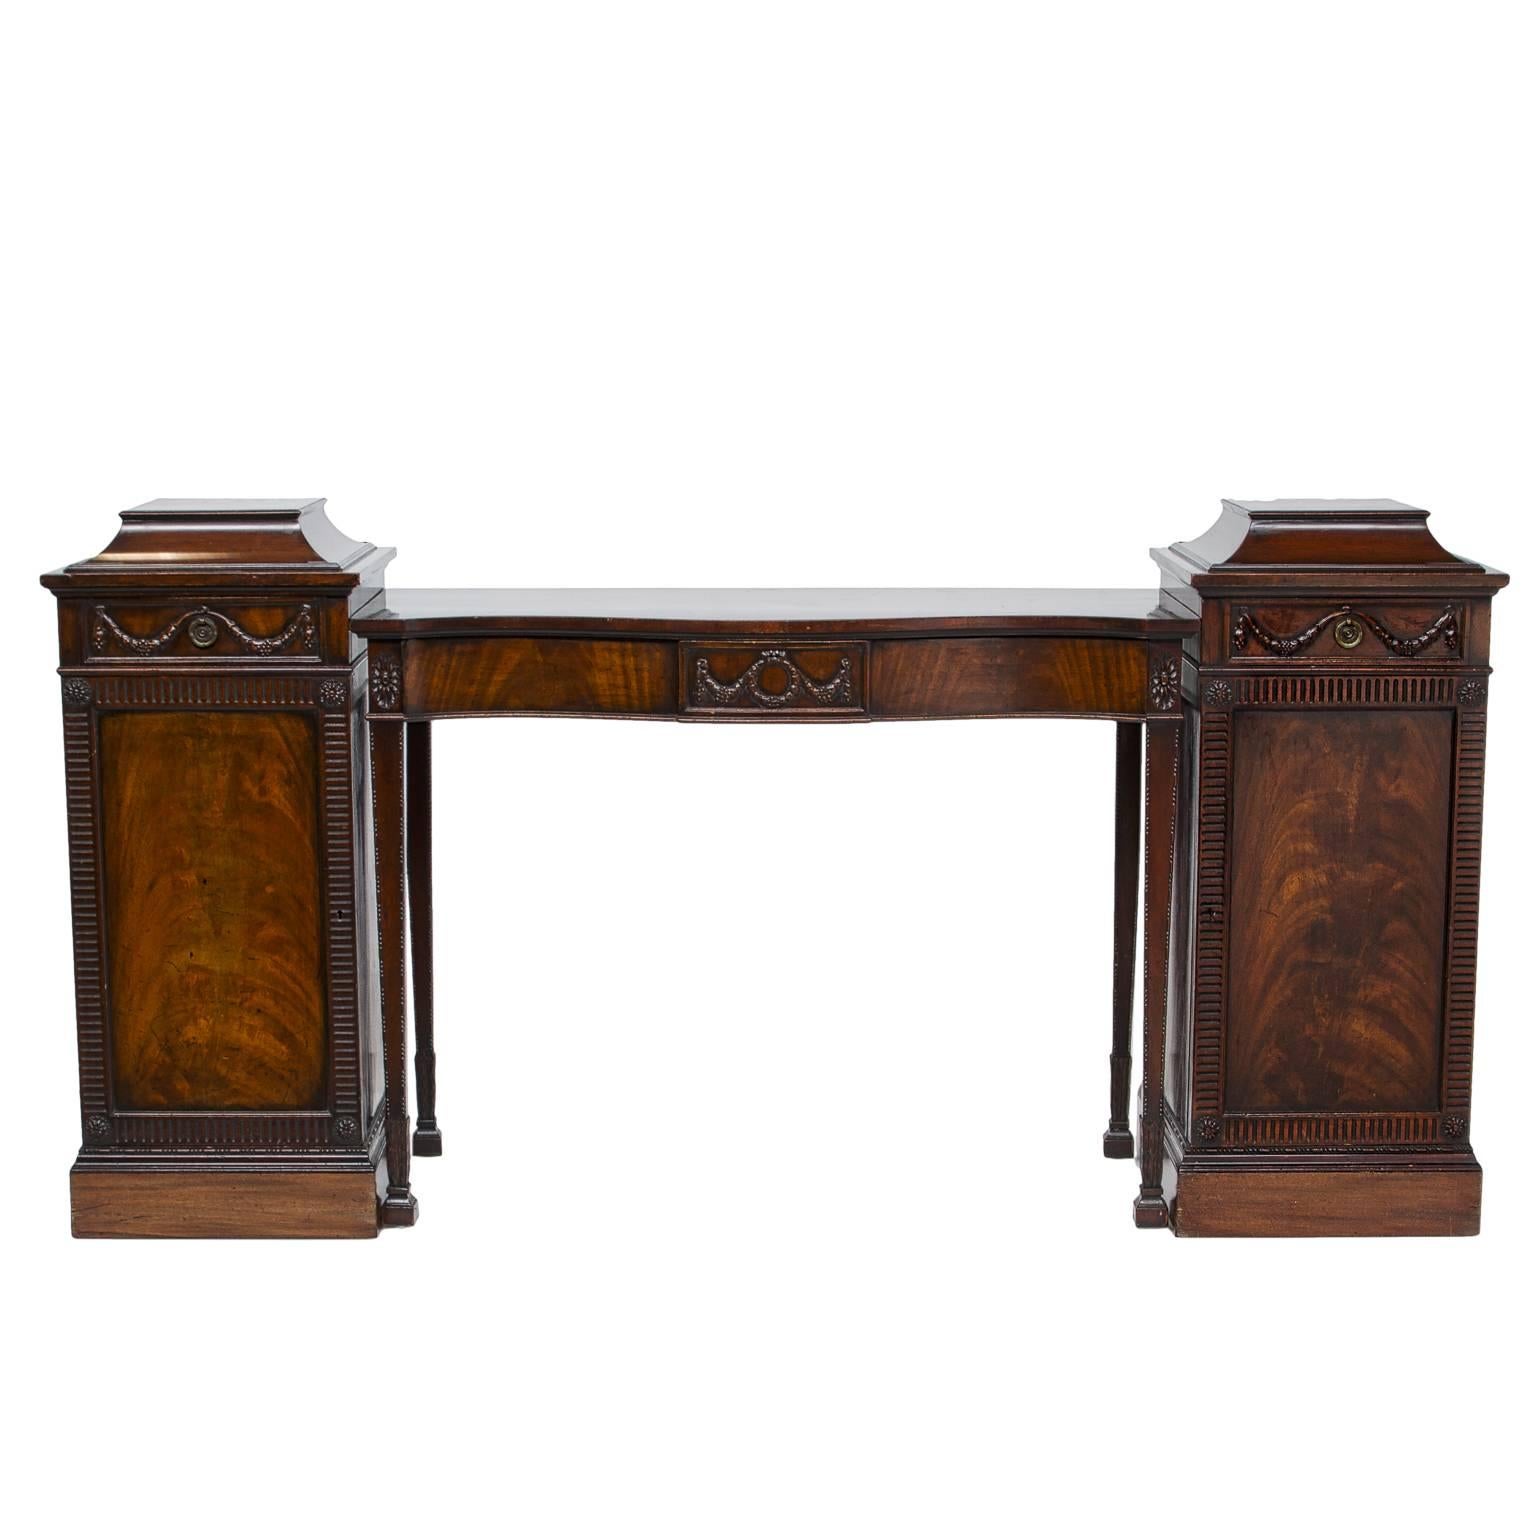 19th Century Adams Style Pedestal or Console Sideboard